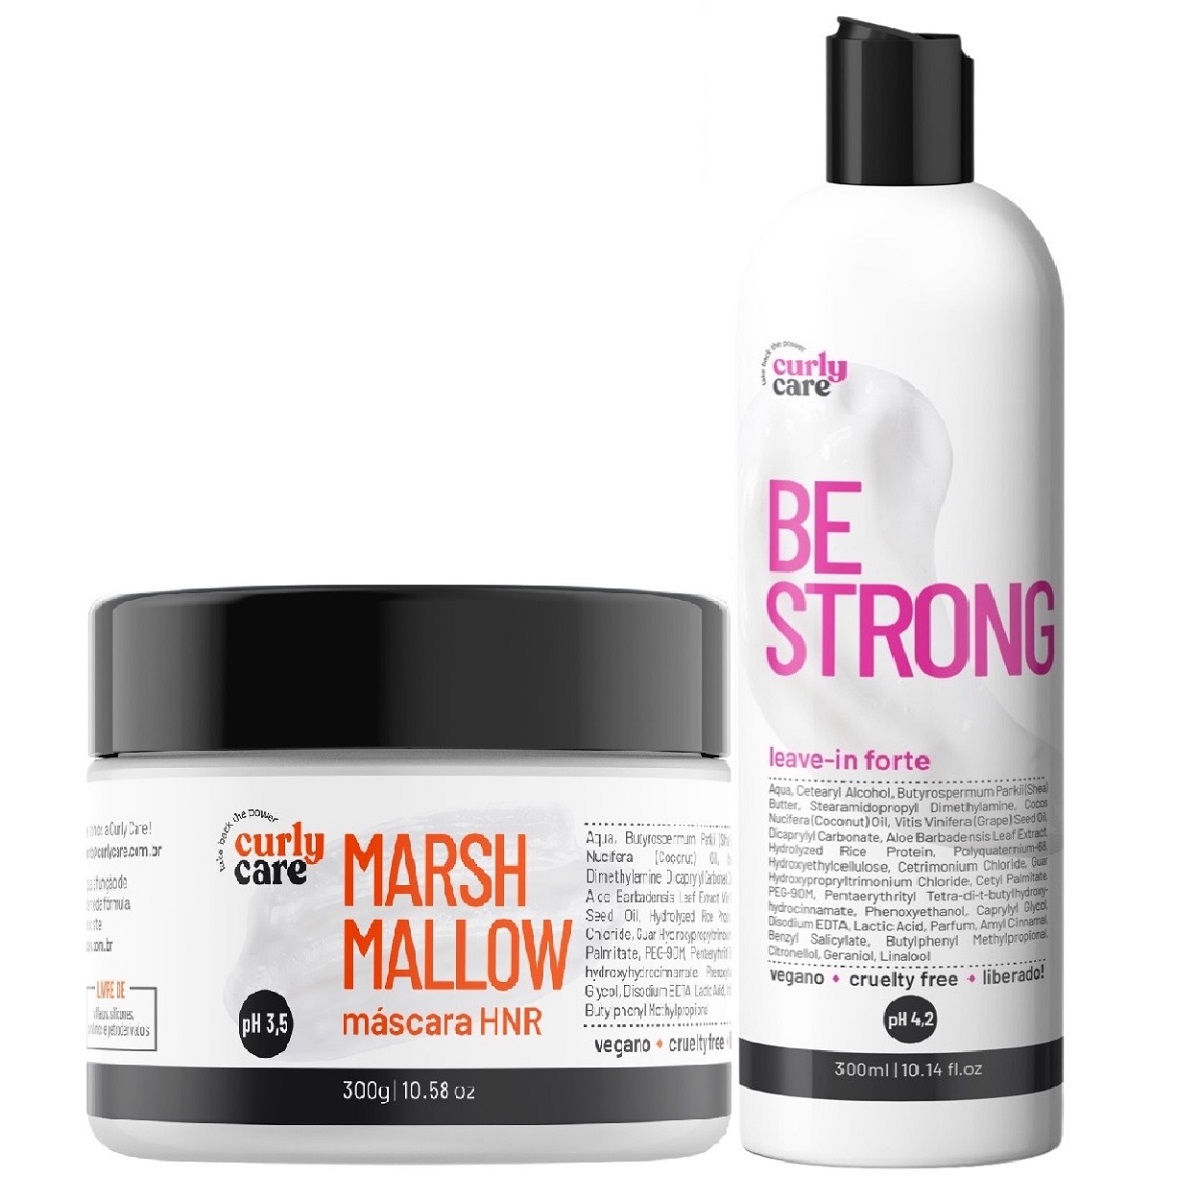 Máscara Marshmallow Curly Care + Leave-in Forte Be Strong